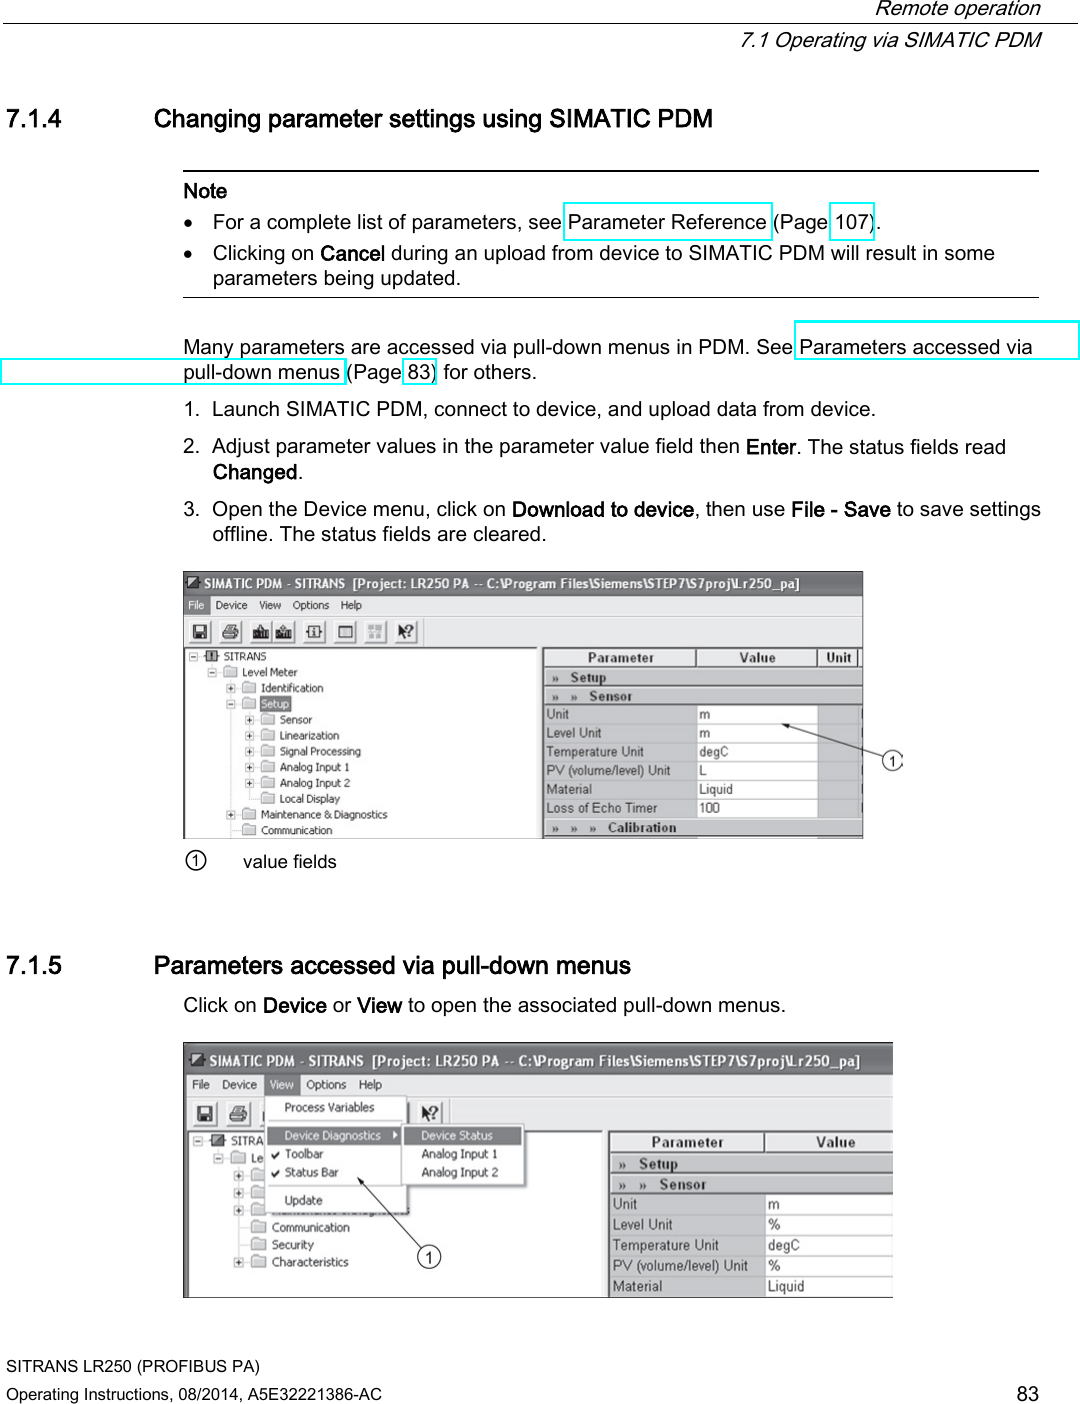  Remote operation  7.1 Operating via SIMATIC PDM SITRANS LR250 (PROFIBUS PA) Operating Instructions, 08/2014, A5E32221386-AC 83 7.1.4 Changing parameter settings using SIMATIC PDM   Note • For a complete list of parameters, see Parameter Reference (Page 107). • Clicking on Cancel during an upload from device to SIMATIC PDM will result in some parameters being updated.  Many parameters are accessed via pull-down menus in PDM. See Parameters accessed via pull-down menus (Page 83) for others. 1. Launch SIMATIC PDM, connect to device, and upload data from device. 2. Adjust parameter values in the parameter value field then Enter. The status fields read Changed. 3. Open the Device menu, click on Download to device, then use File - Save to save settings offline. The status fields are cleared.  ① value fields 7.1.5 Parameters accessed via pull-down menus Click on Device or View to open the associated pull-down menus.  